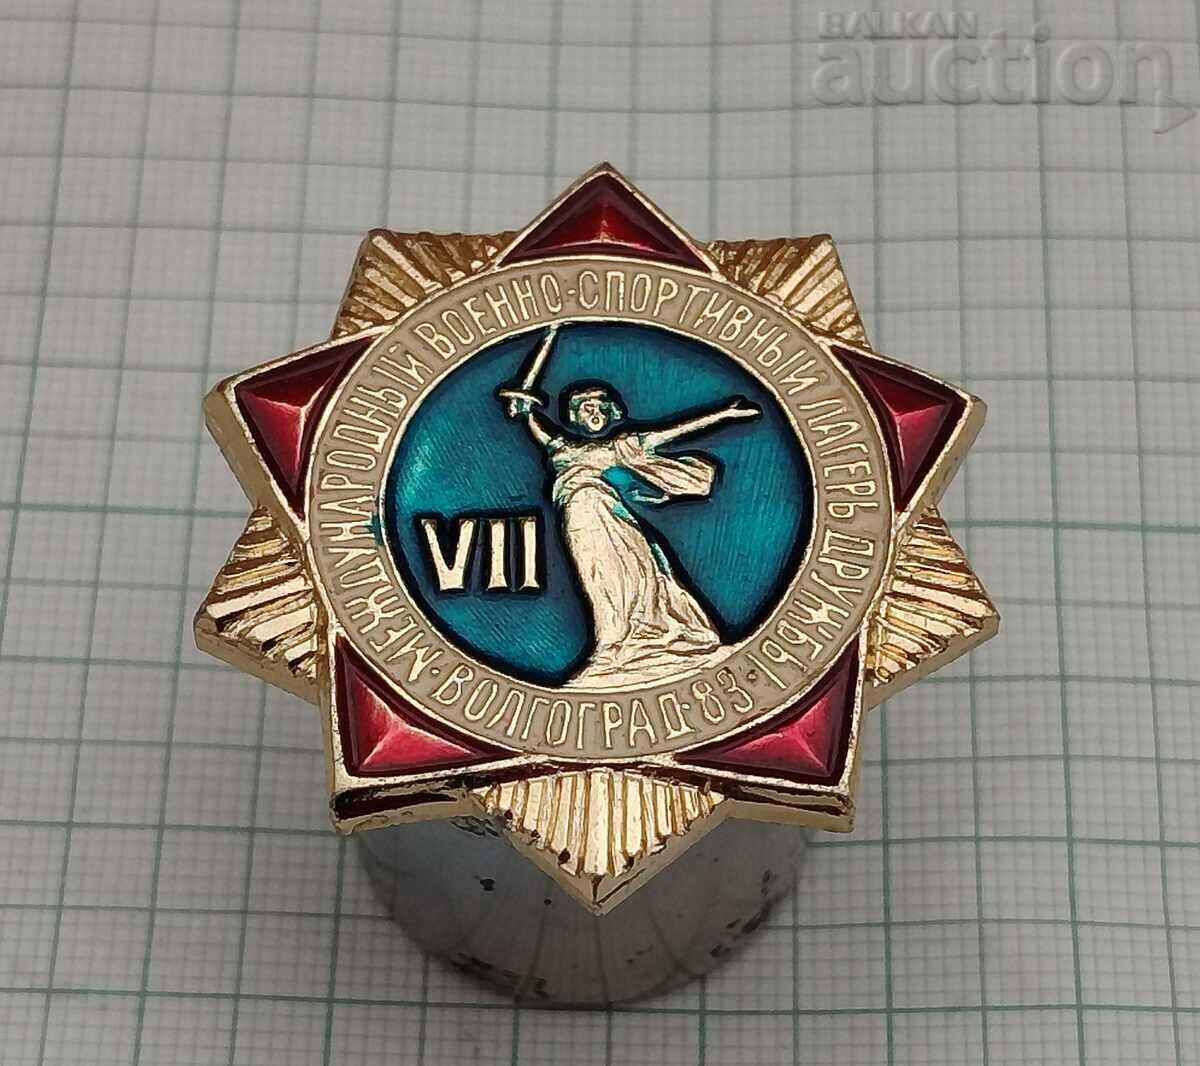 MILITARY SPORTS CAMP OF THE SOCIETY VOLGOGRAD 1983 BADGE